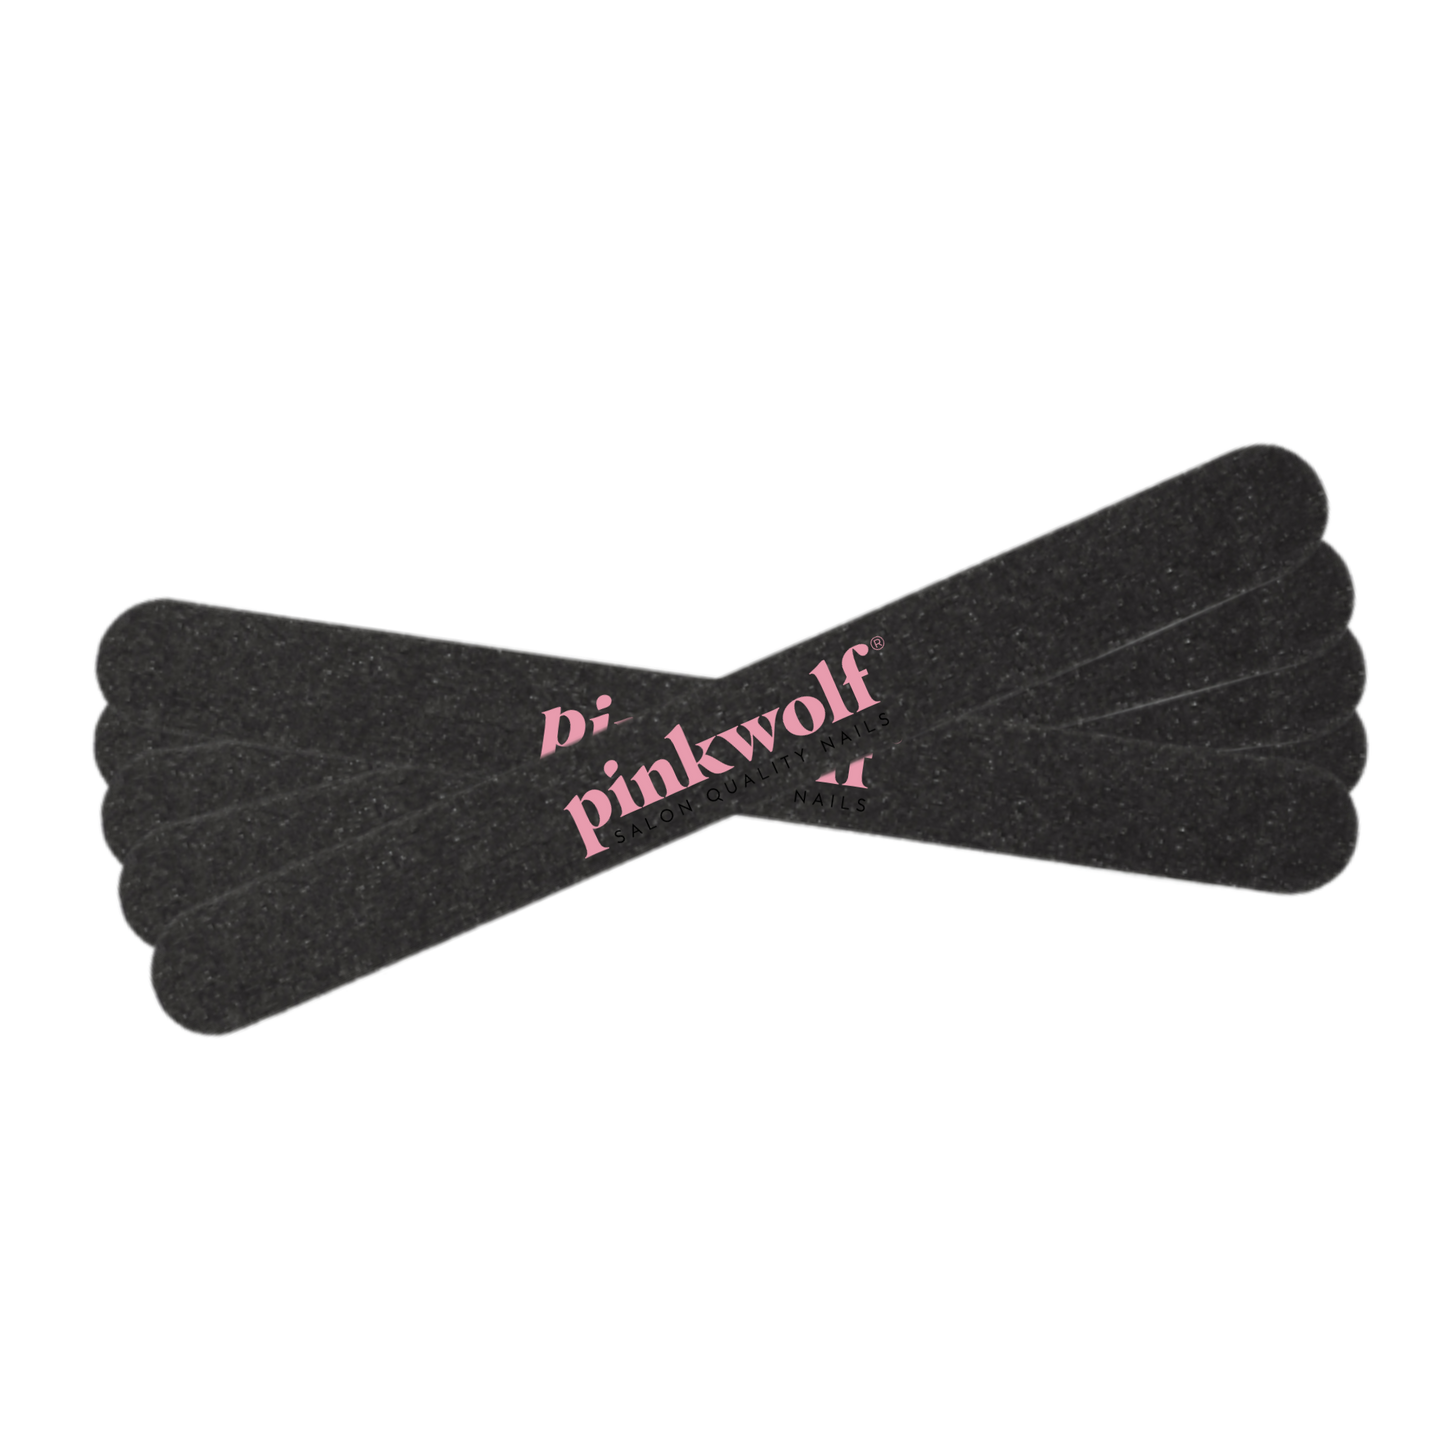 pinkwolf 5 pack of nail files